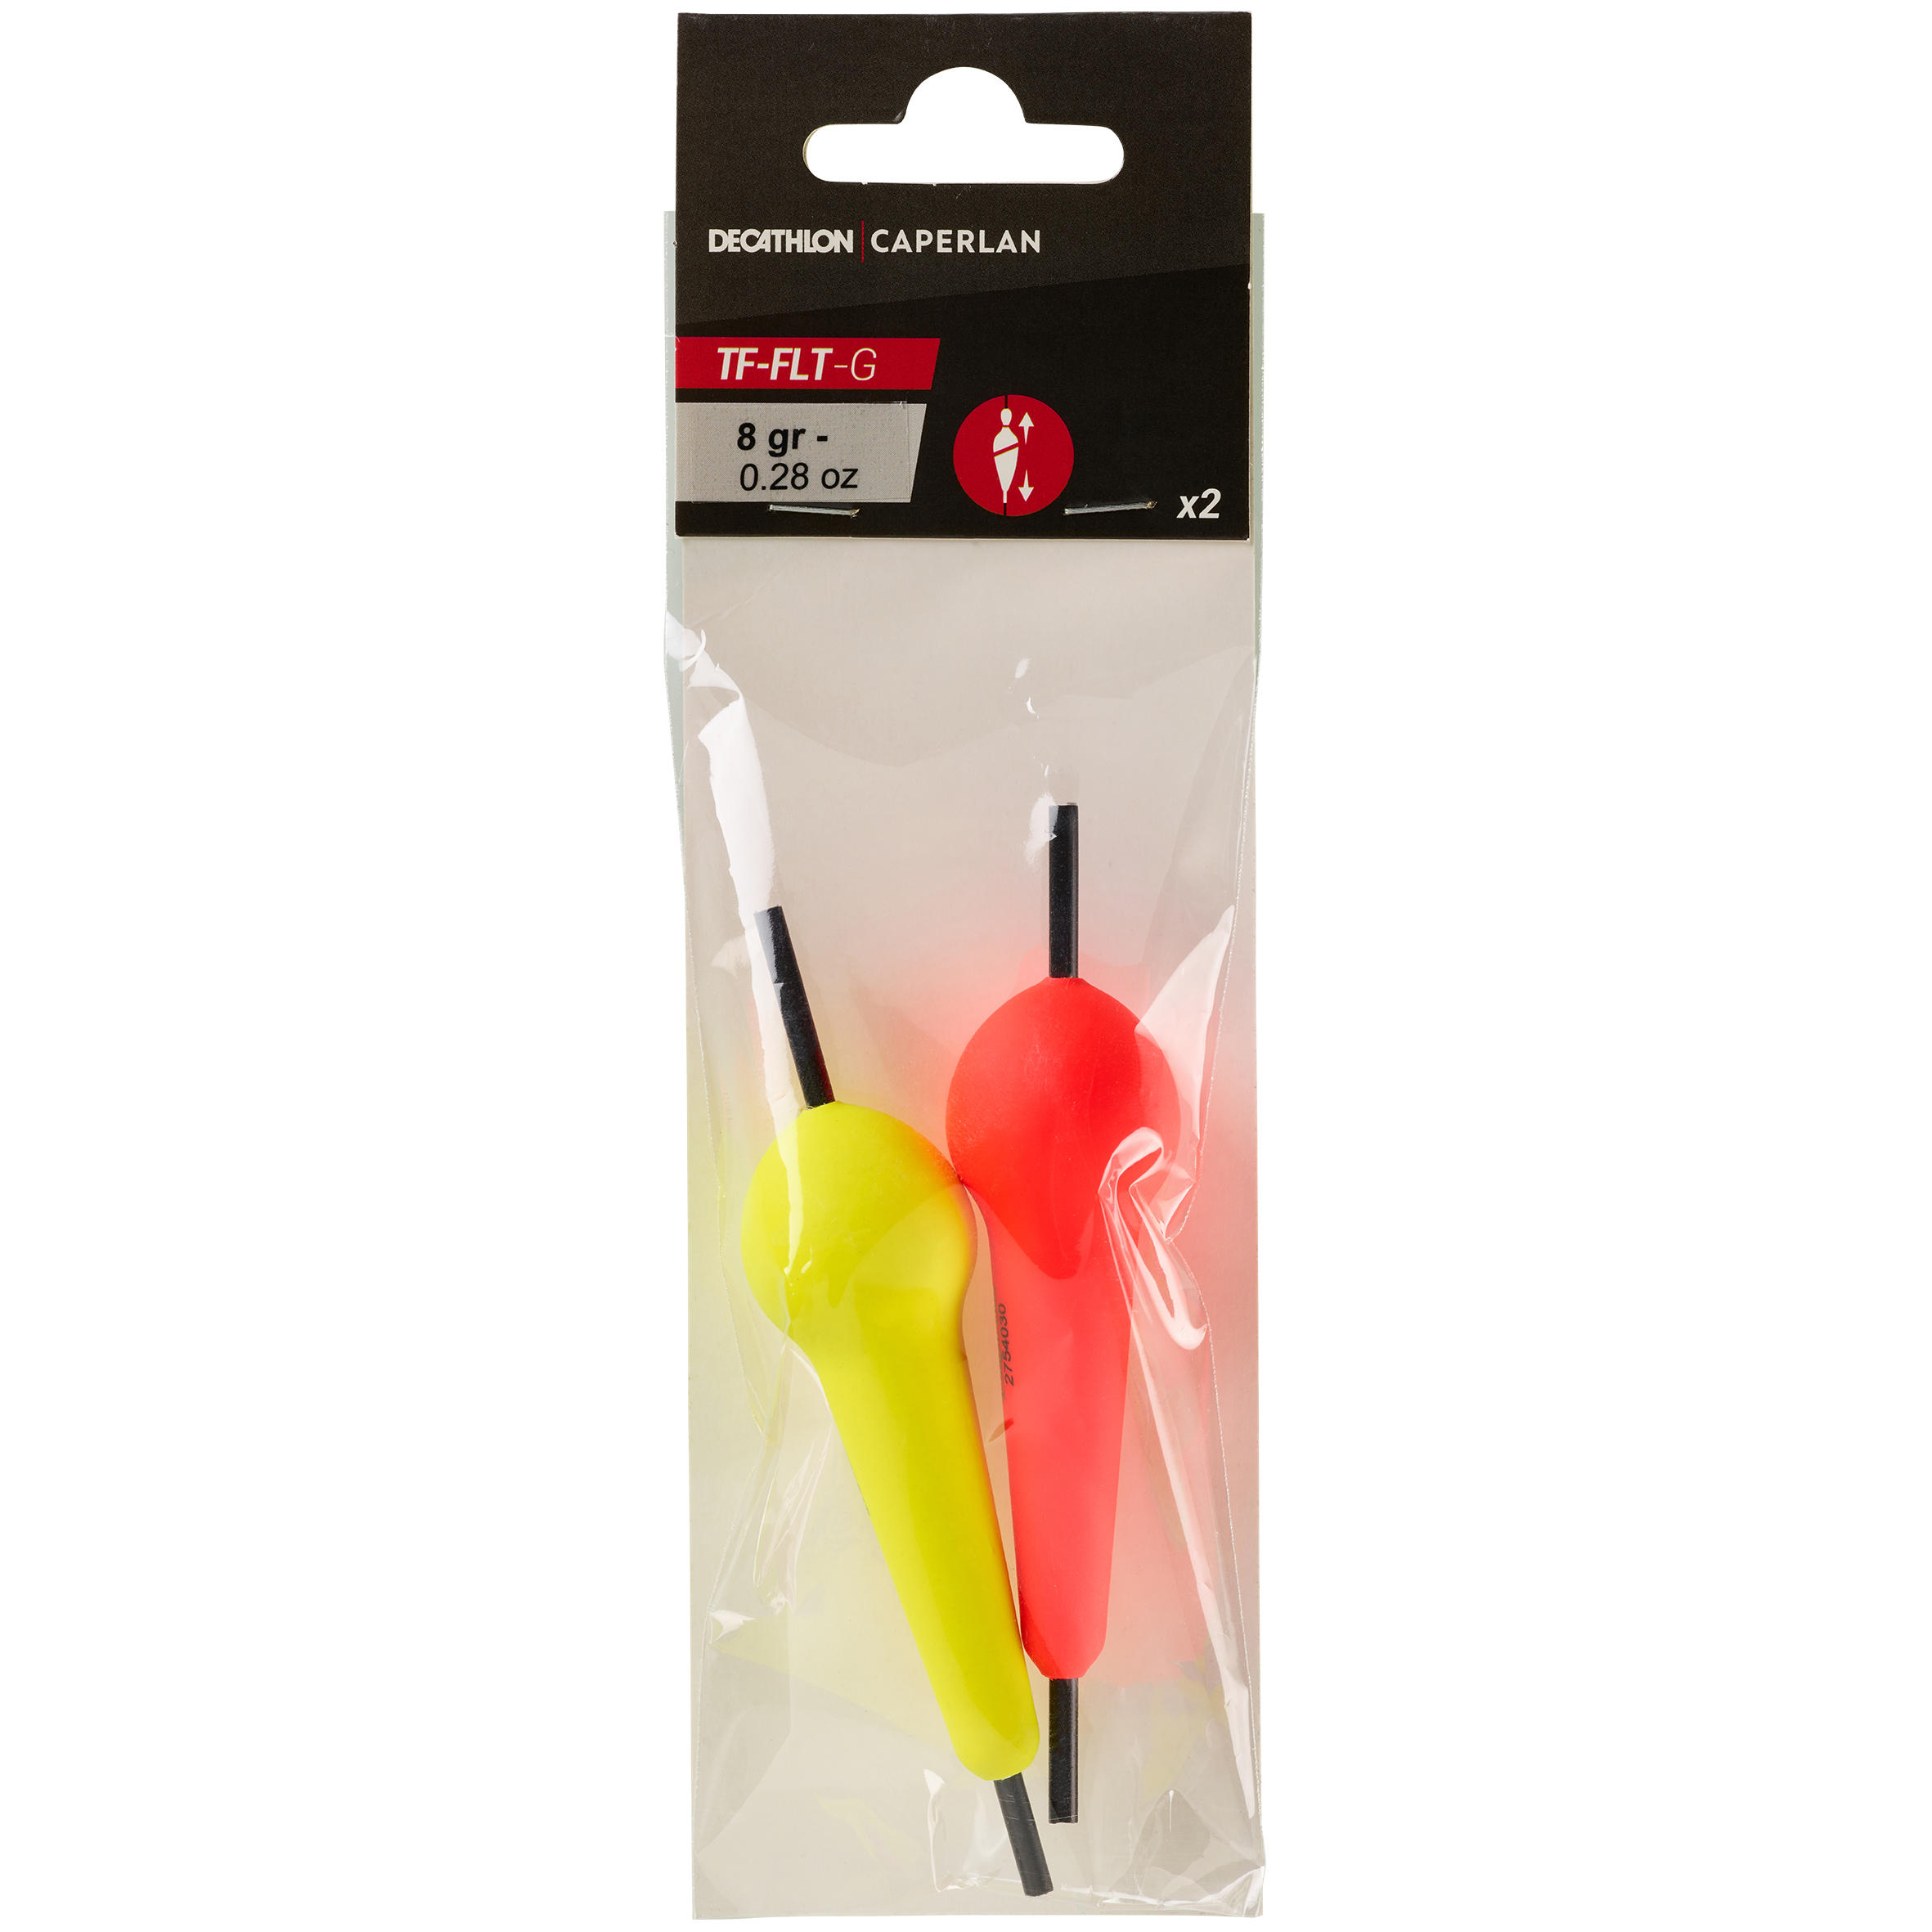 TROUT FISHING FLOATS TF-G 2/2